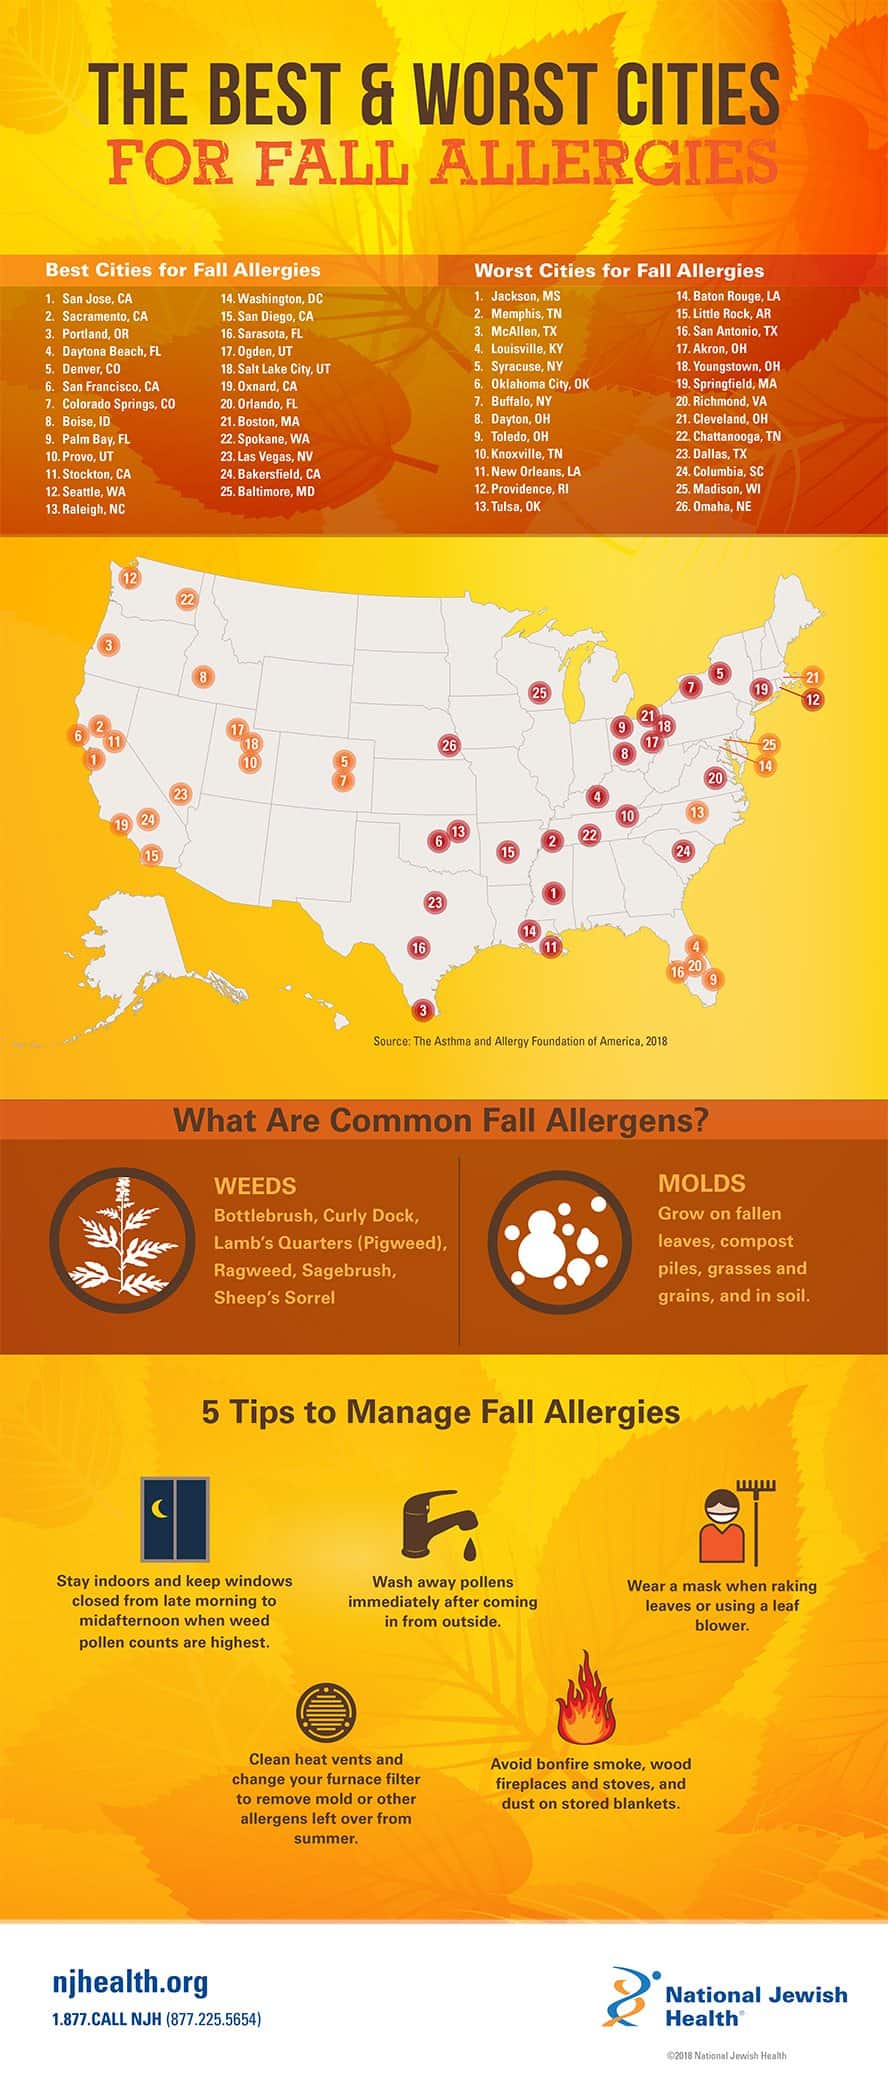 Best and worst cities for people with allergies in the U.S.